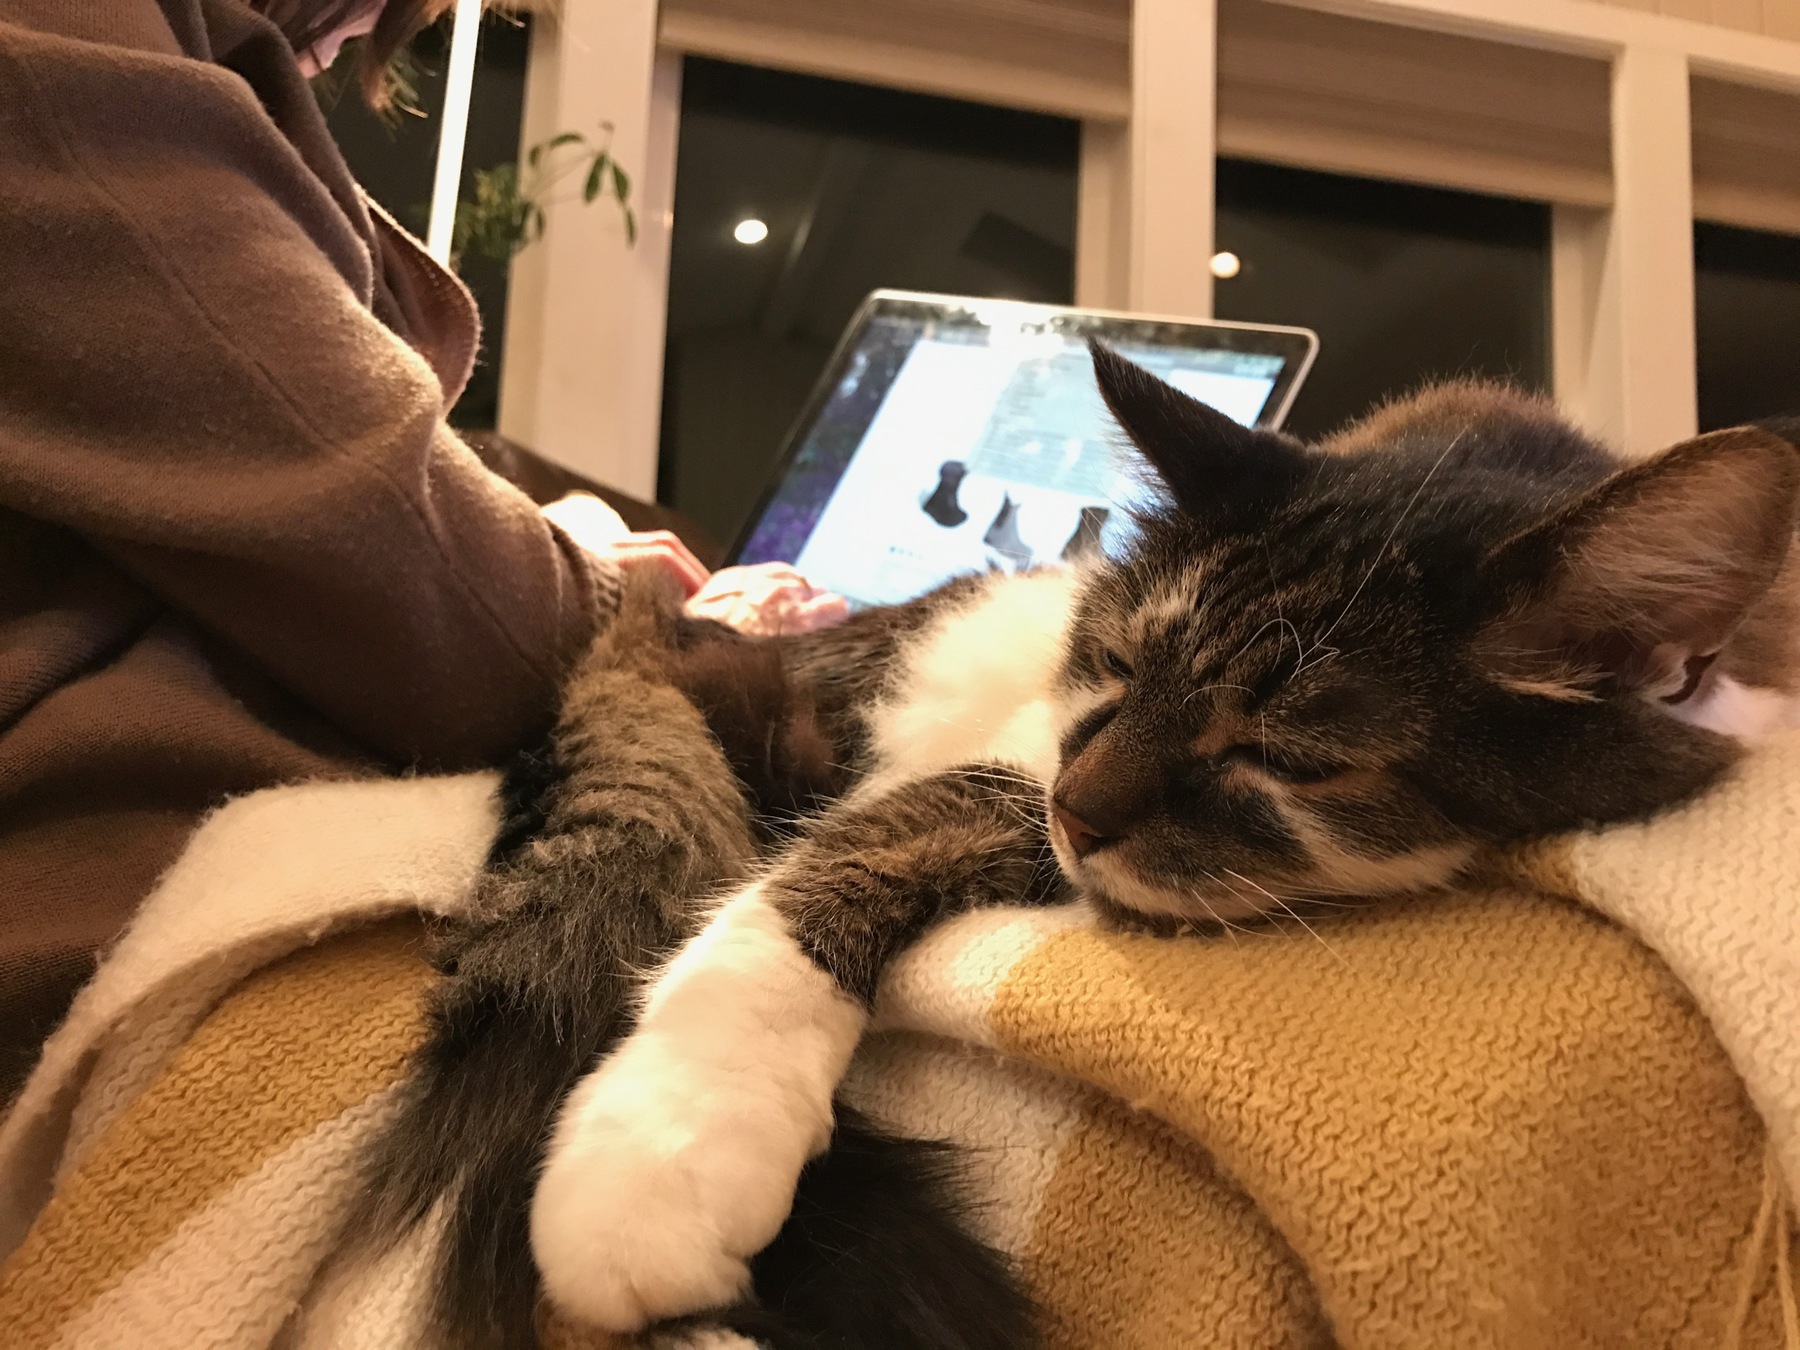 Leo lounging on a lap